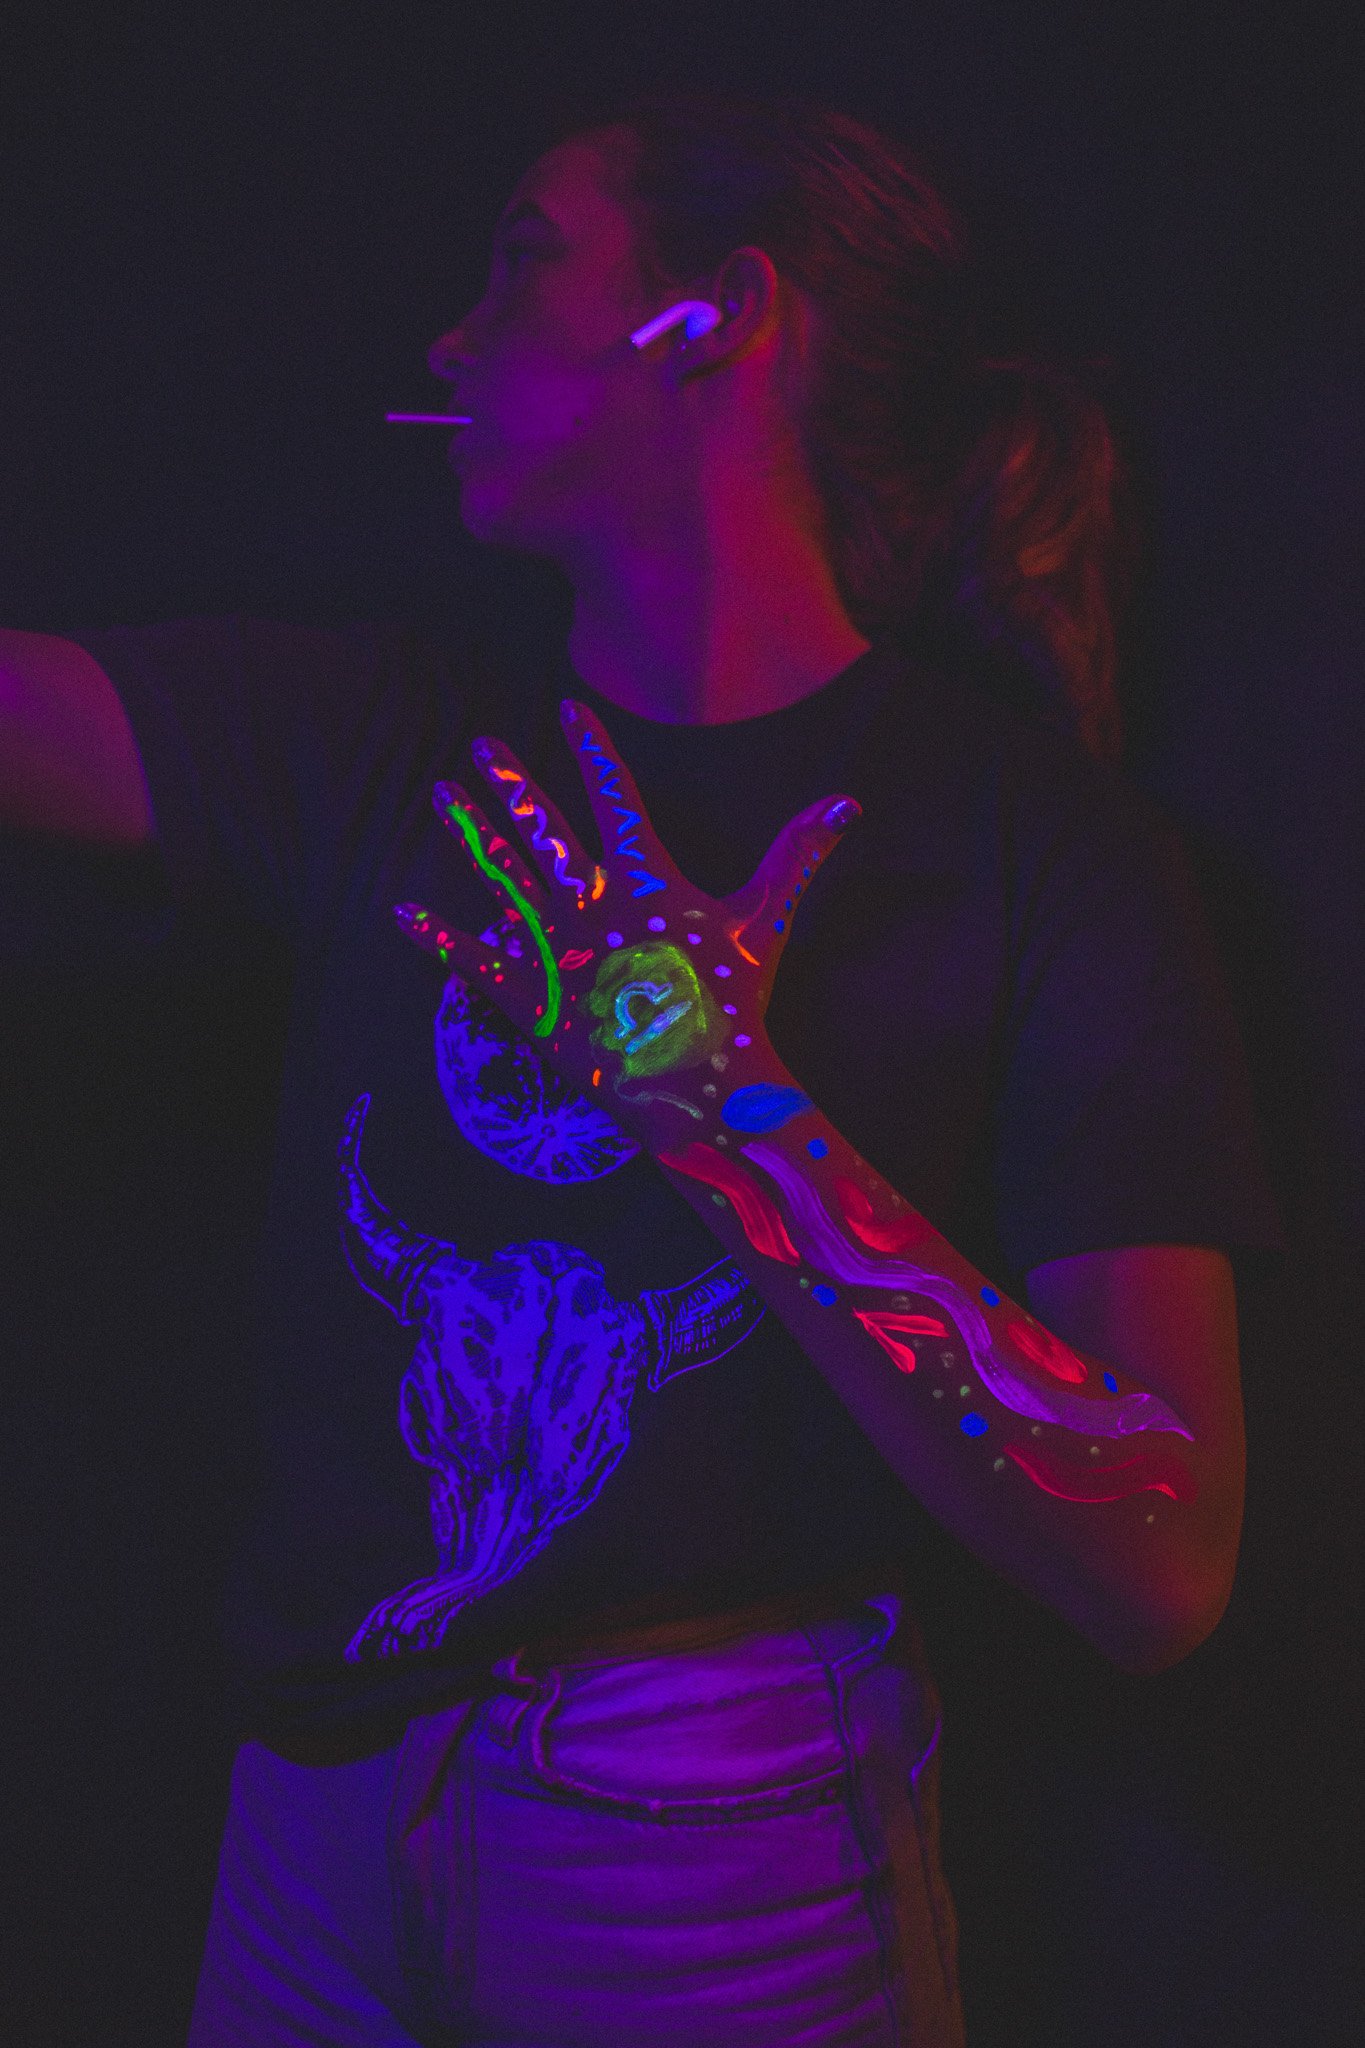 Kid poses with geometric neon body paint on their arm for alternative neon body painting creative photoshoot by phoenix body artist, La Luna Henna and photographer Jennifer Lind Schutsky.